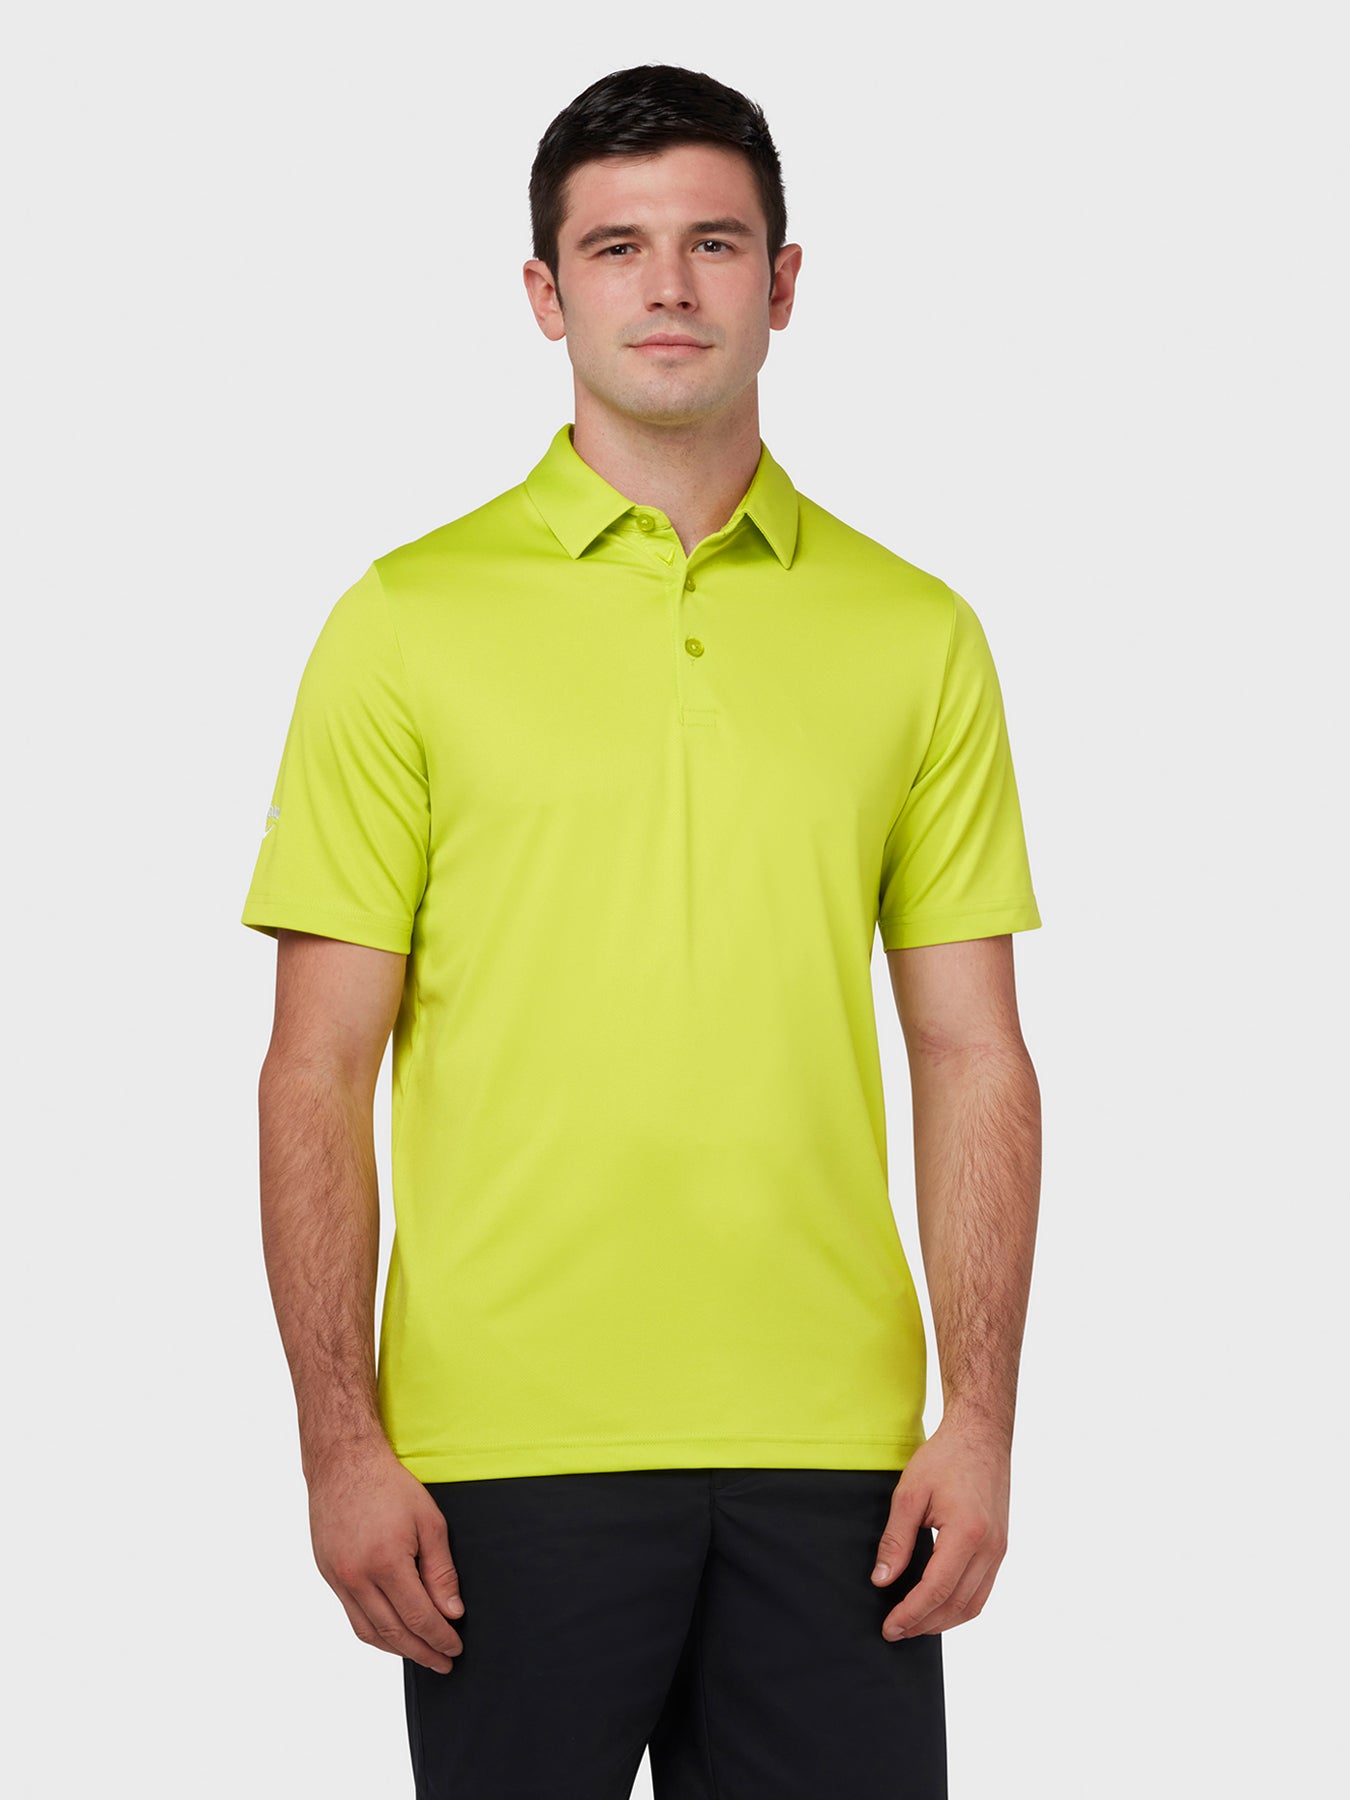 View Swing Tech Tour Polo In Surreal Green Surreal Green M information